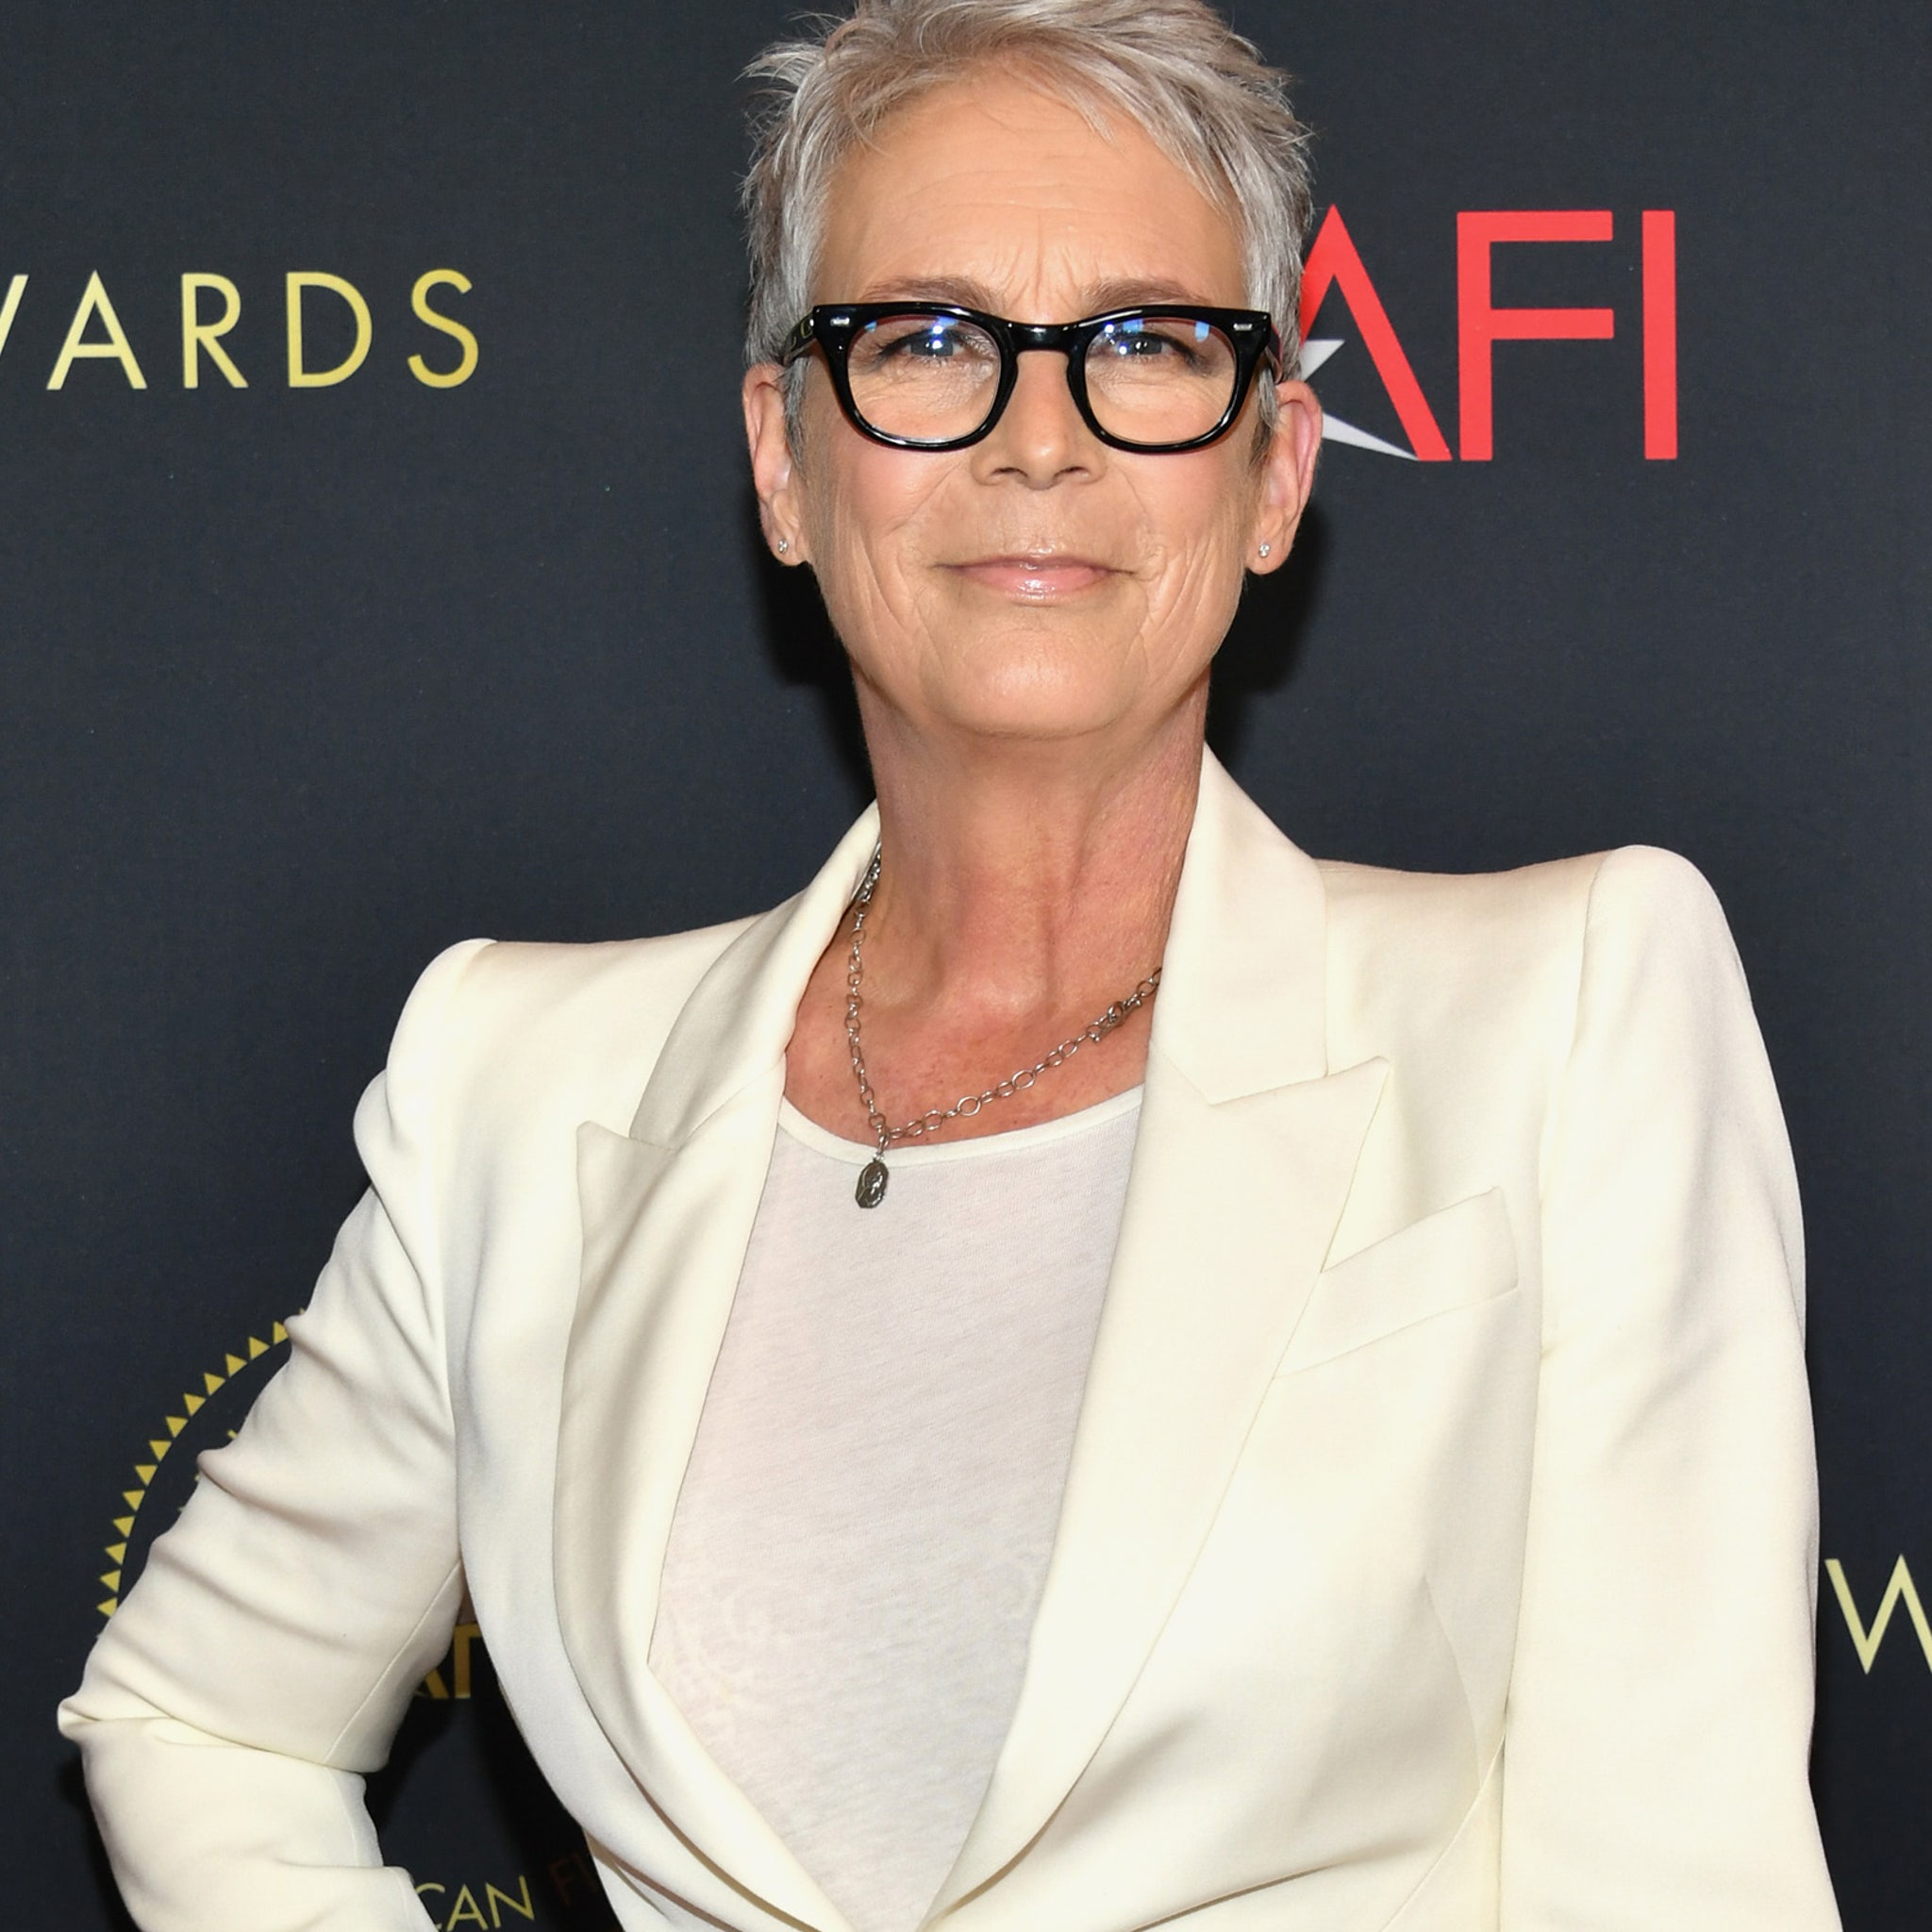 Heavy Action + Activia: The Career Of Jamie Lee Curtis